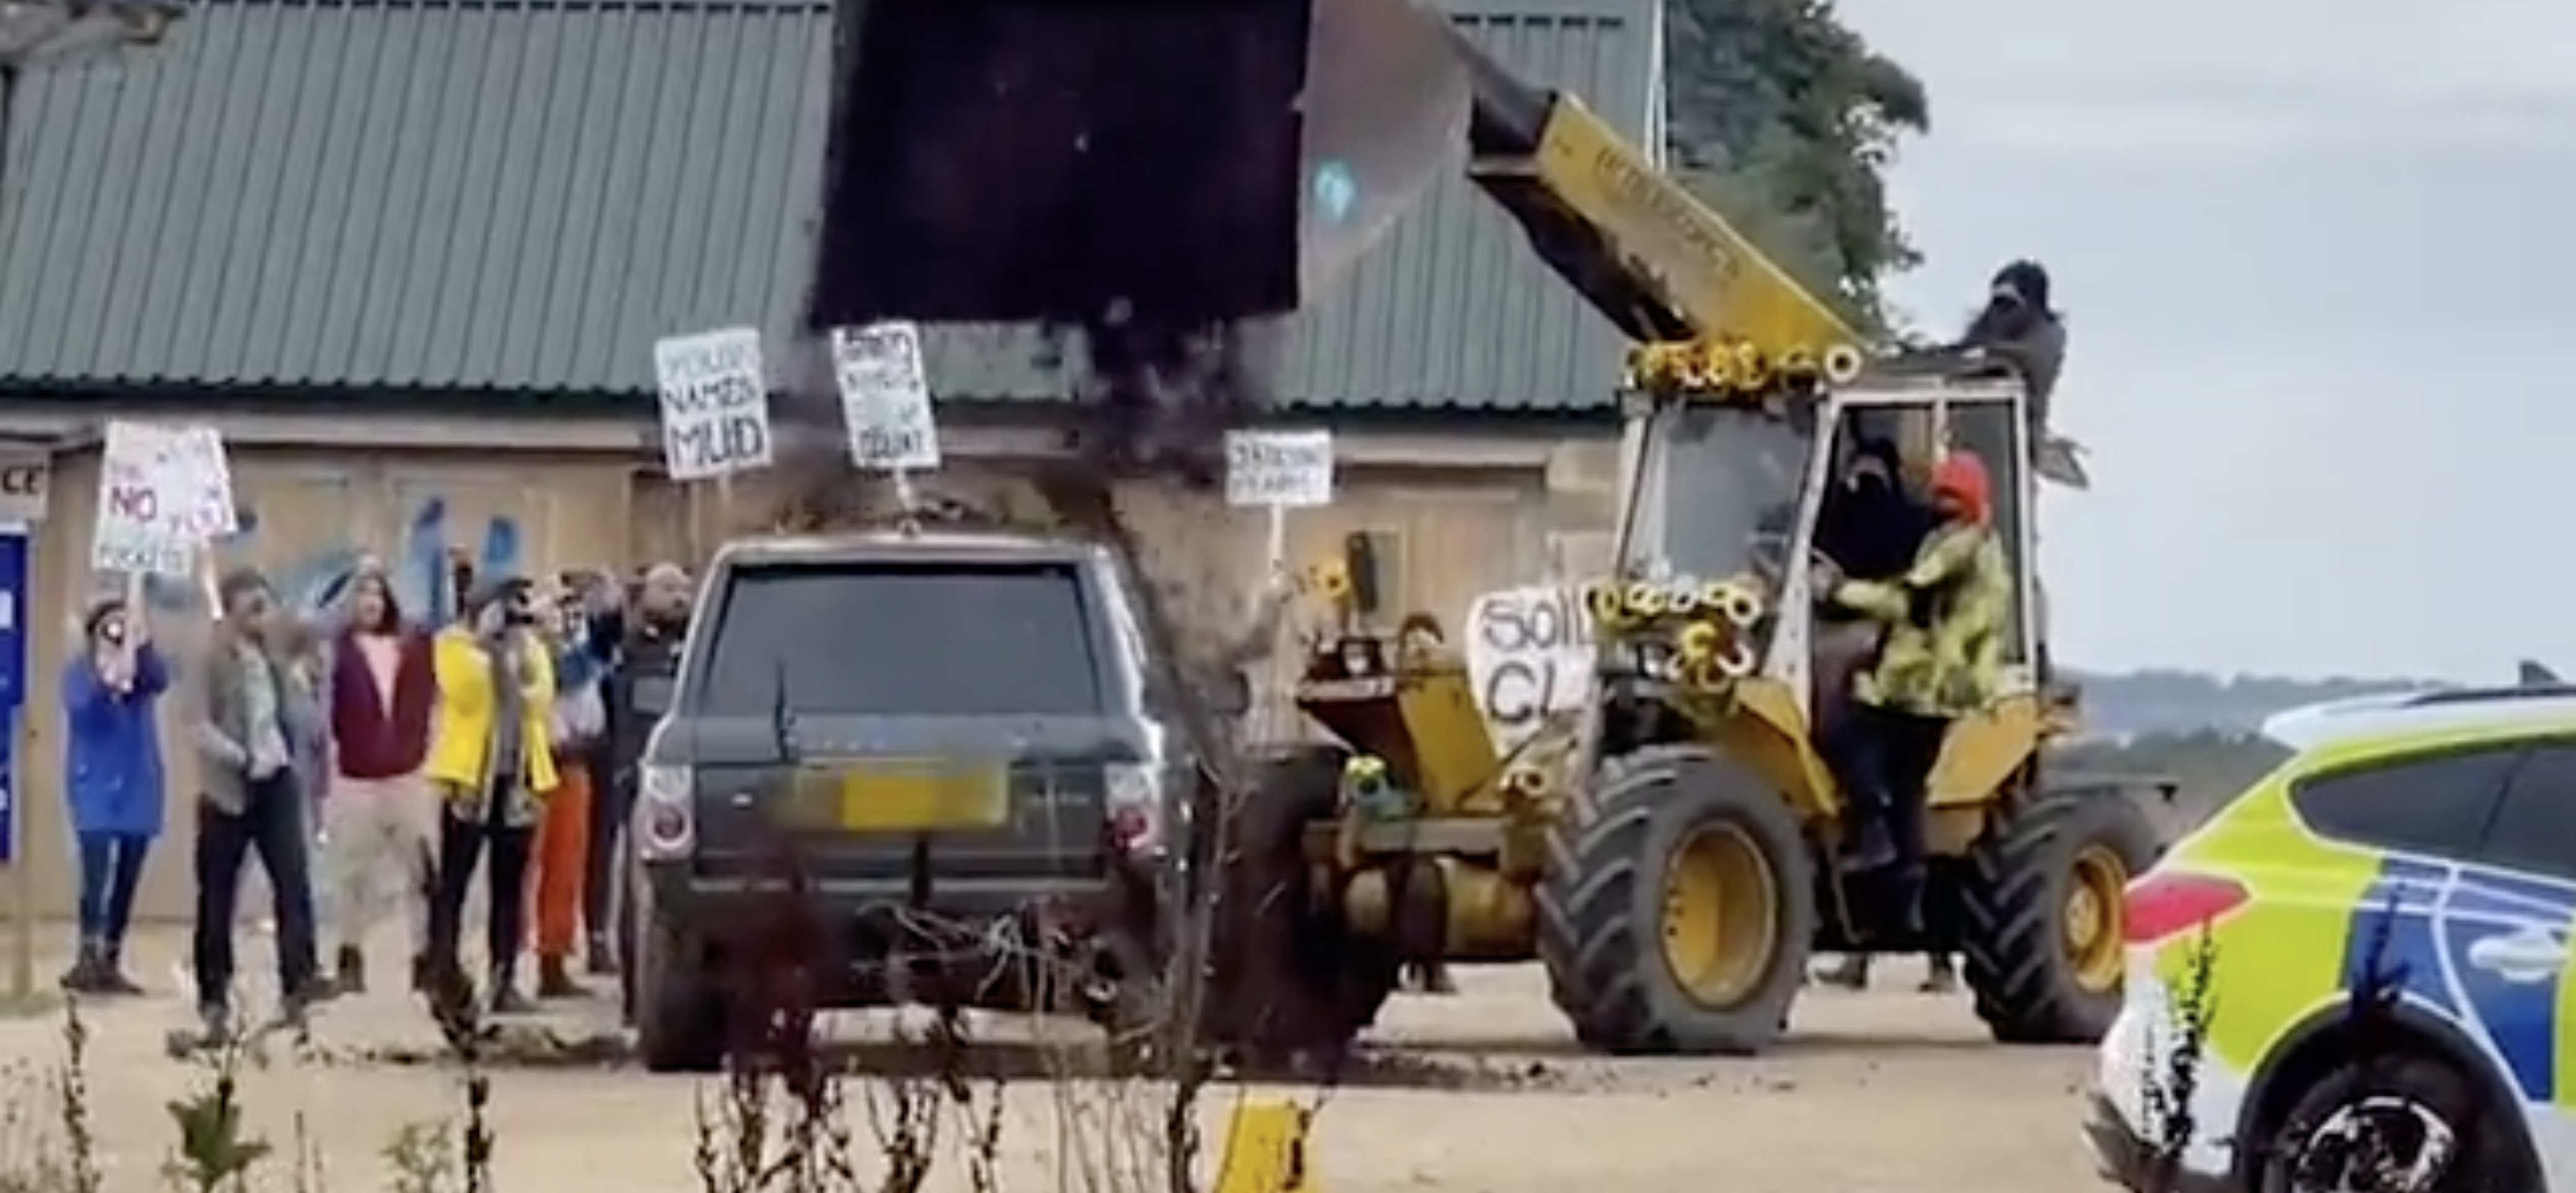 ‘Eco protesters’ dump three-tonnes of compost on Jeremy Clarkson’s Range Rover – but it’s not all as it seems